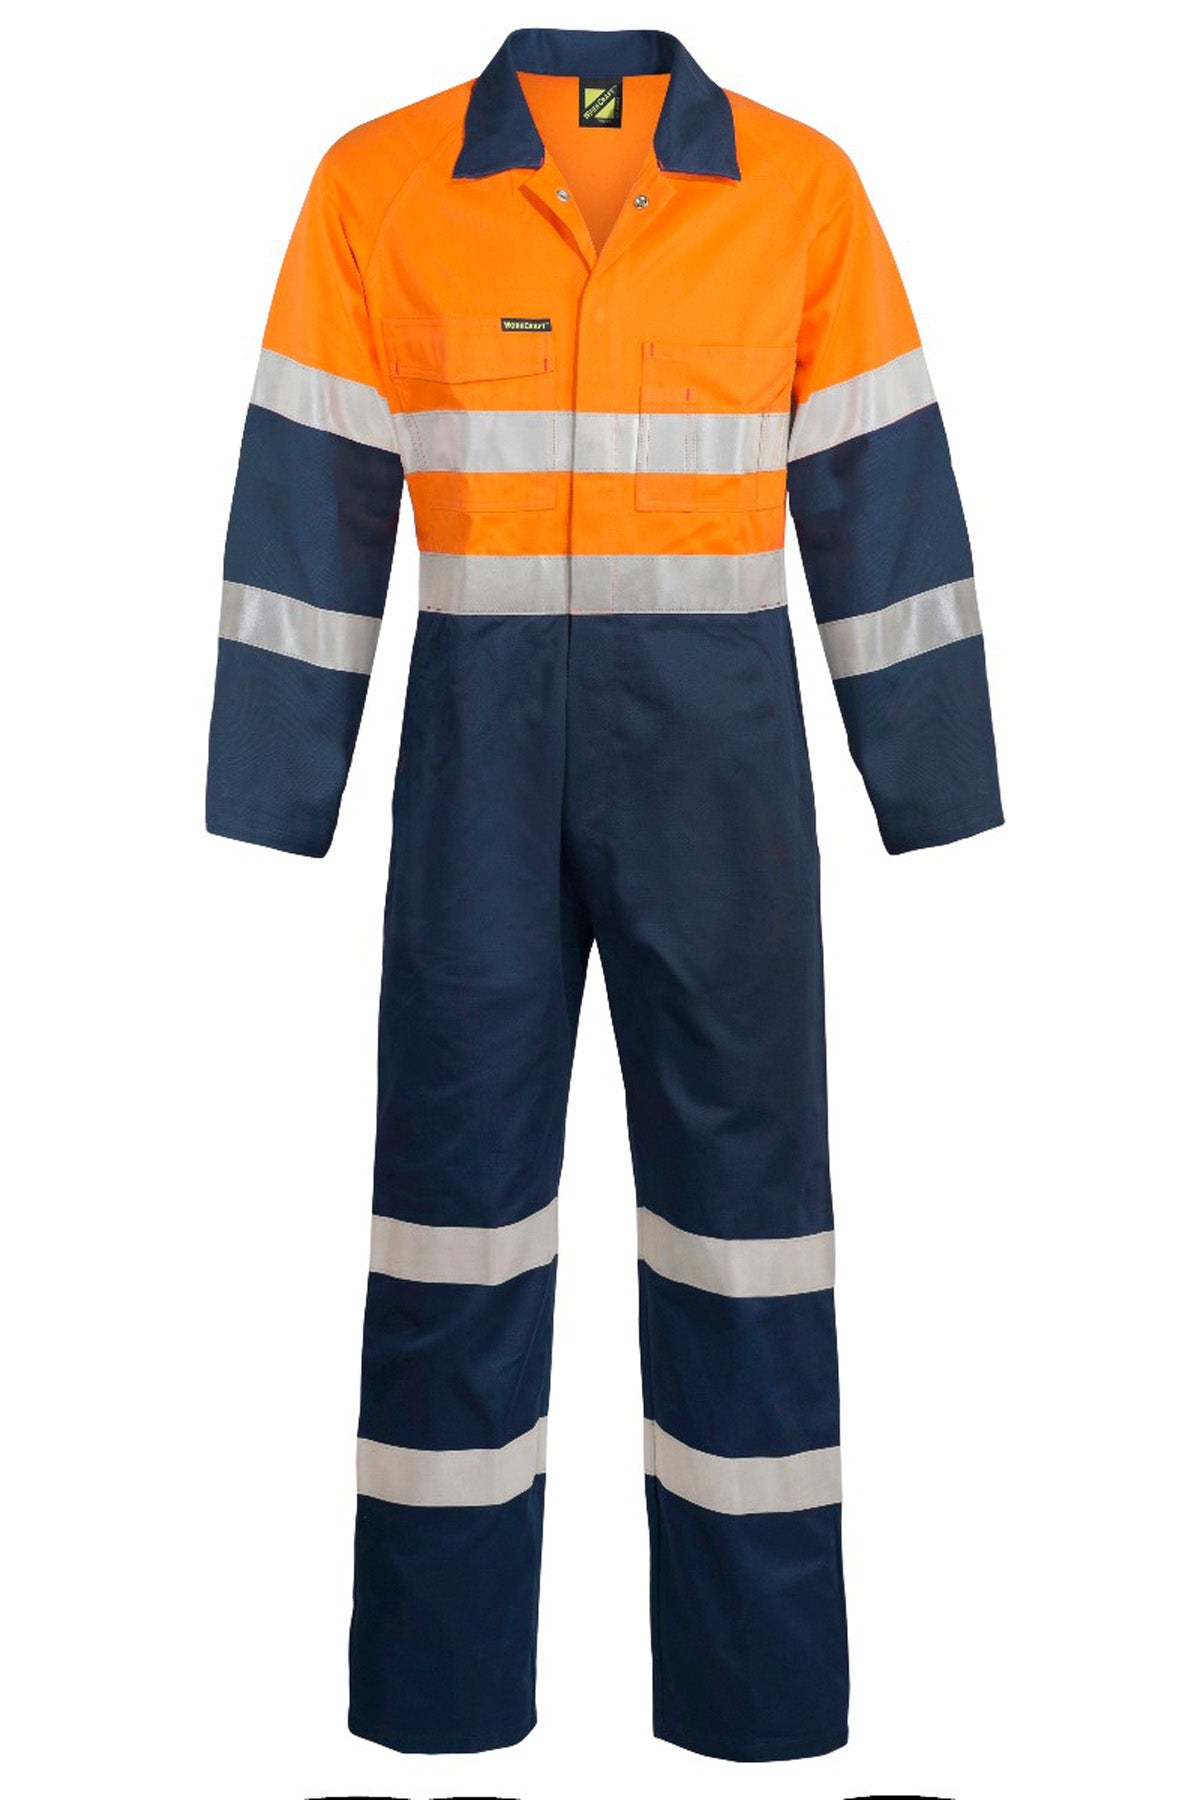 Workcraft WC3056 Hi Vis Cotton Drill Reflective Industrial Laundry Coveralls